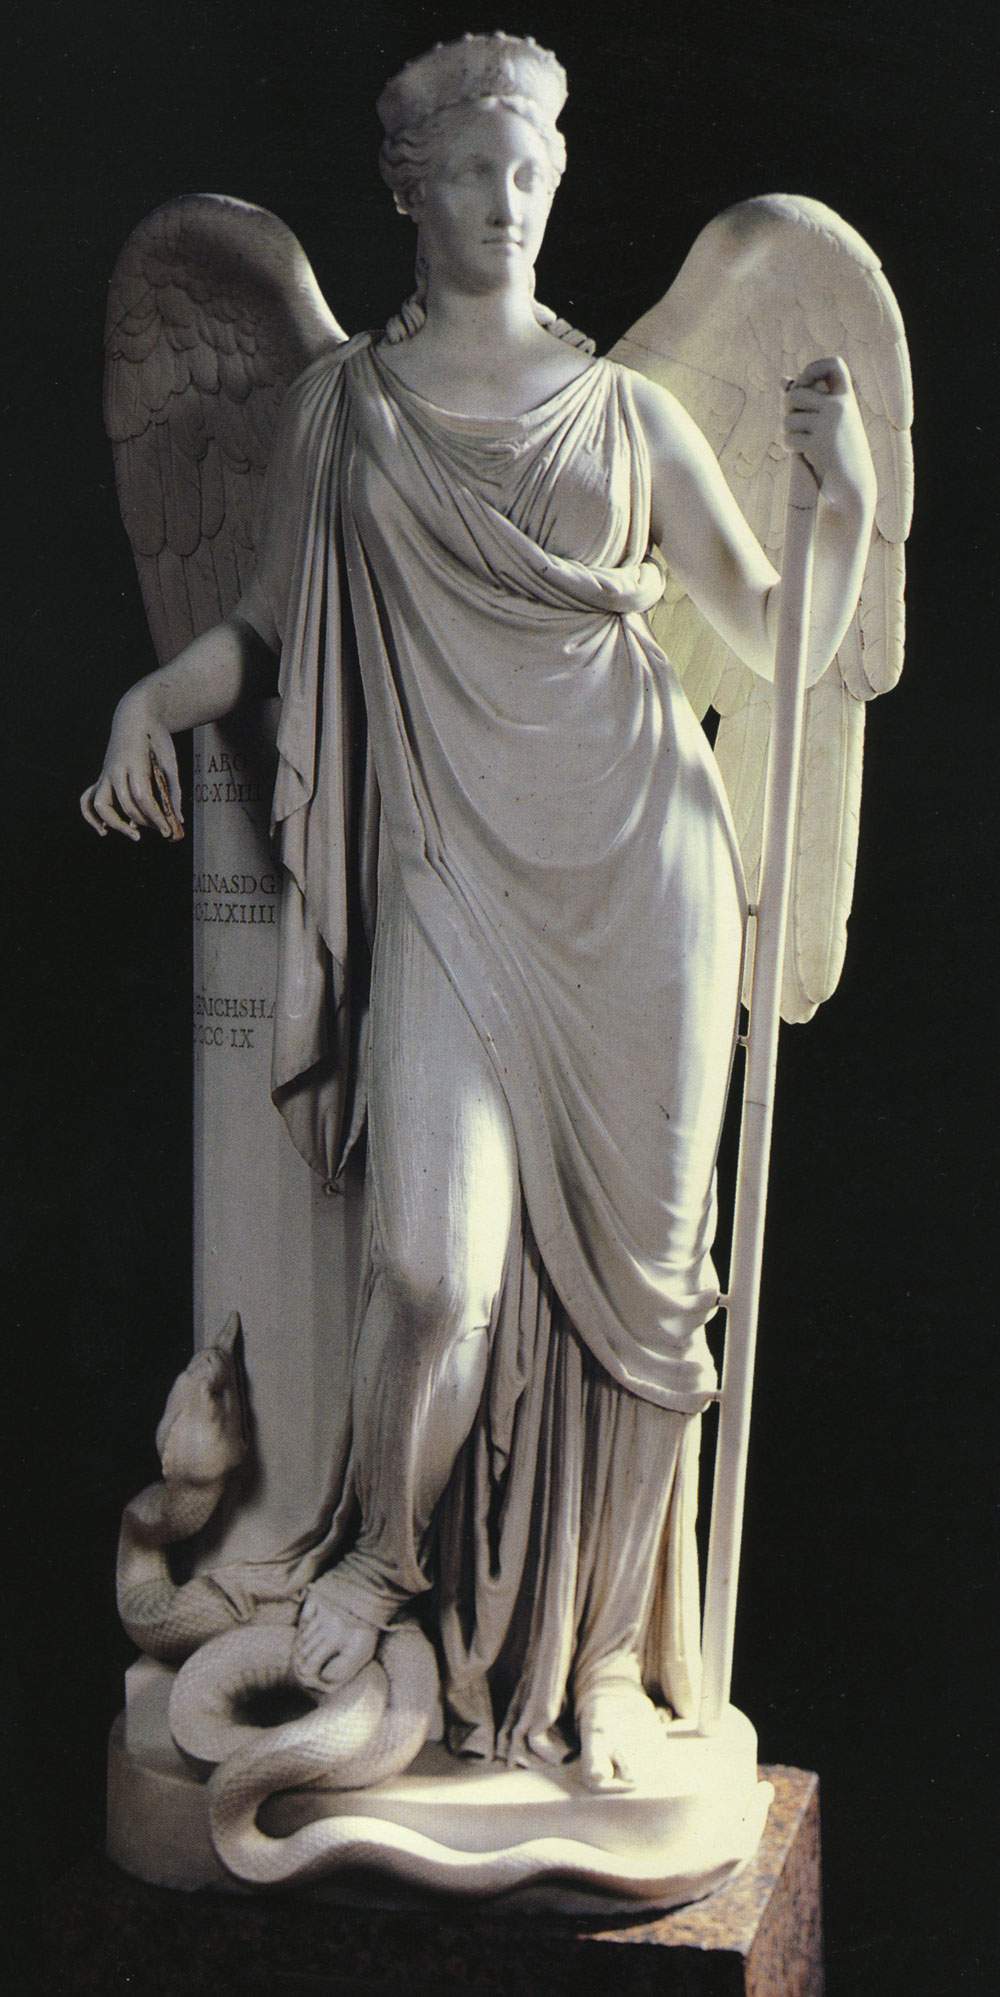 The exhibition Canova and the ancient also features Peace from the Kiev Museum